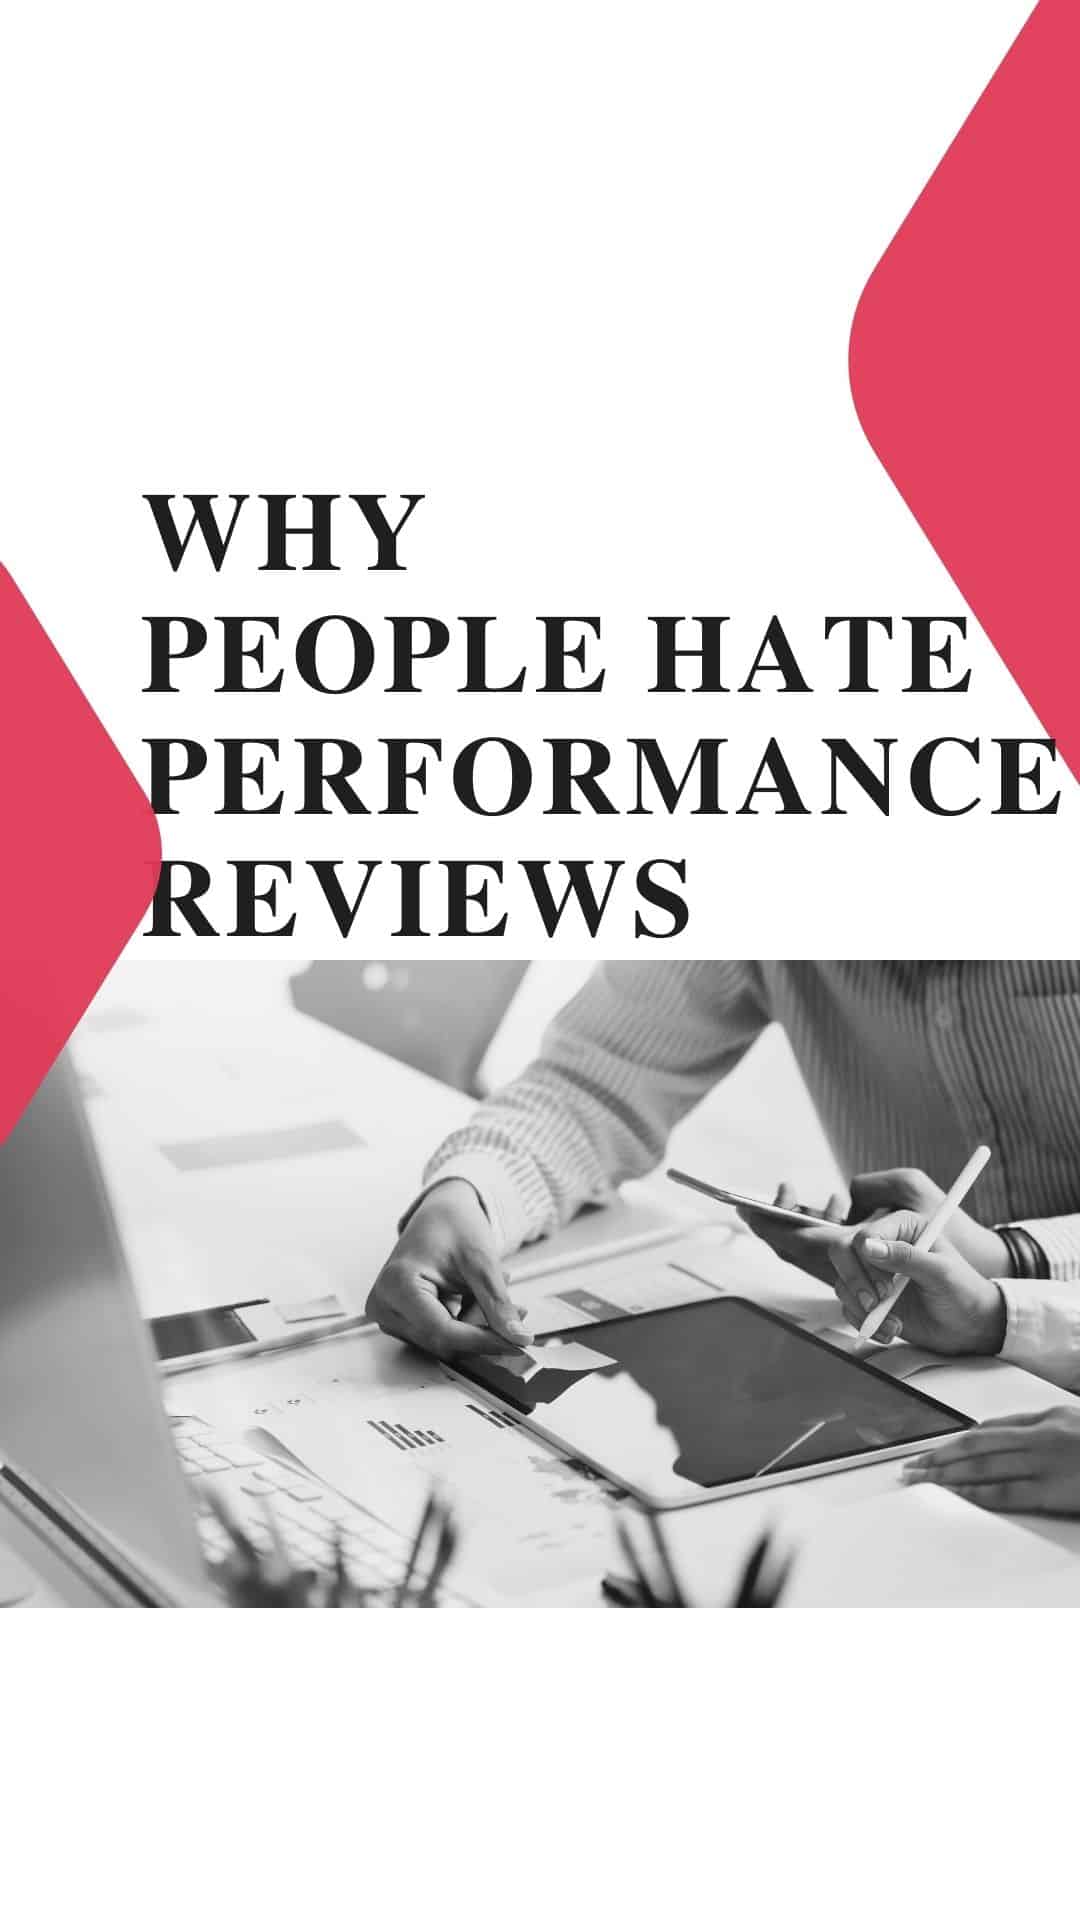 Here’s What can Go Wrong during your Performance Review